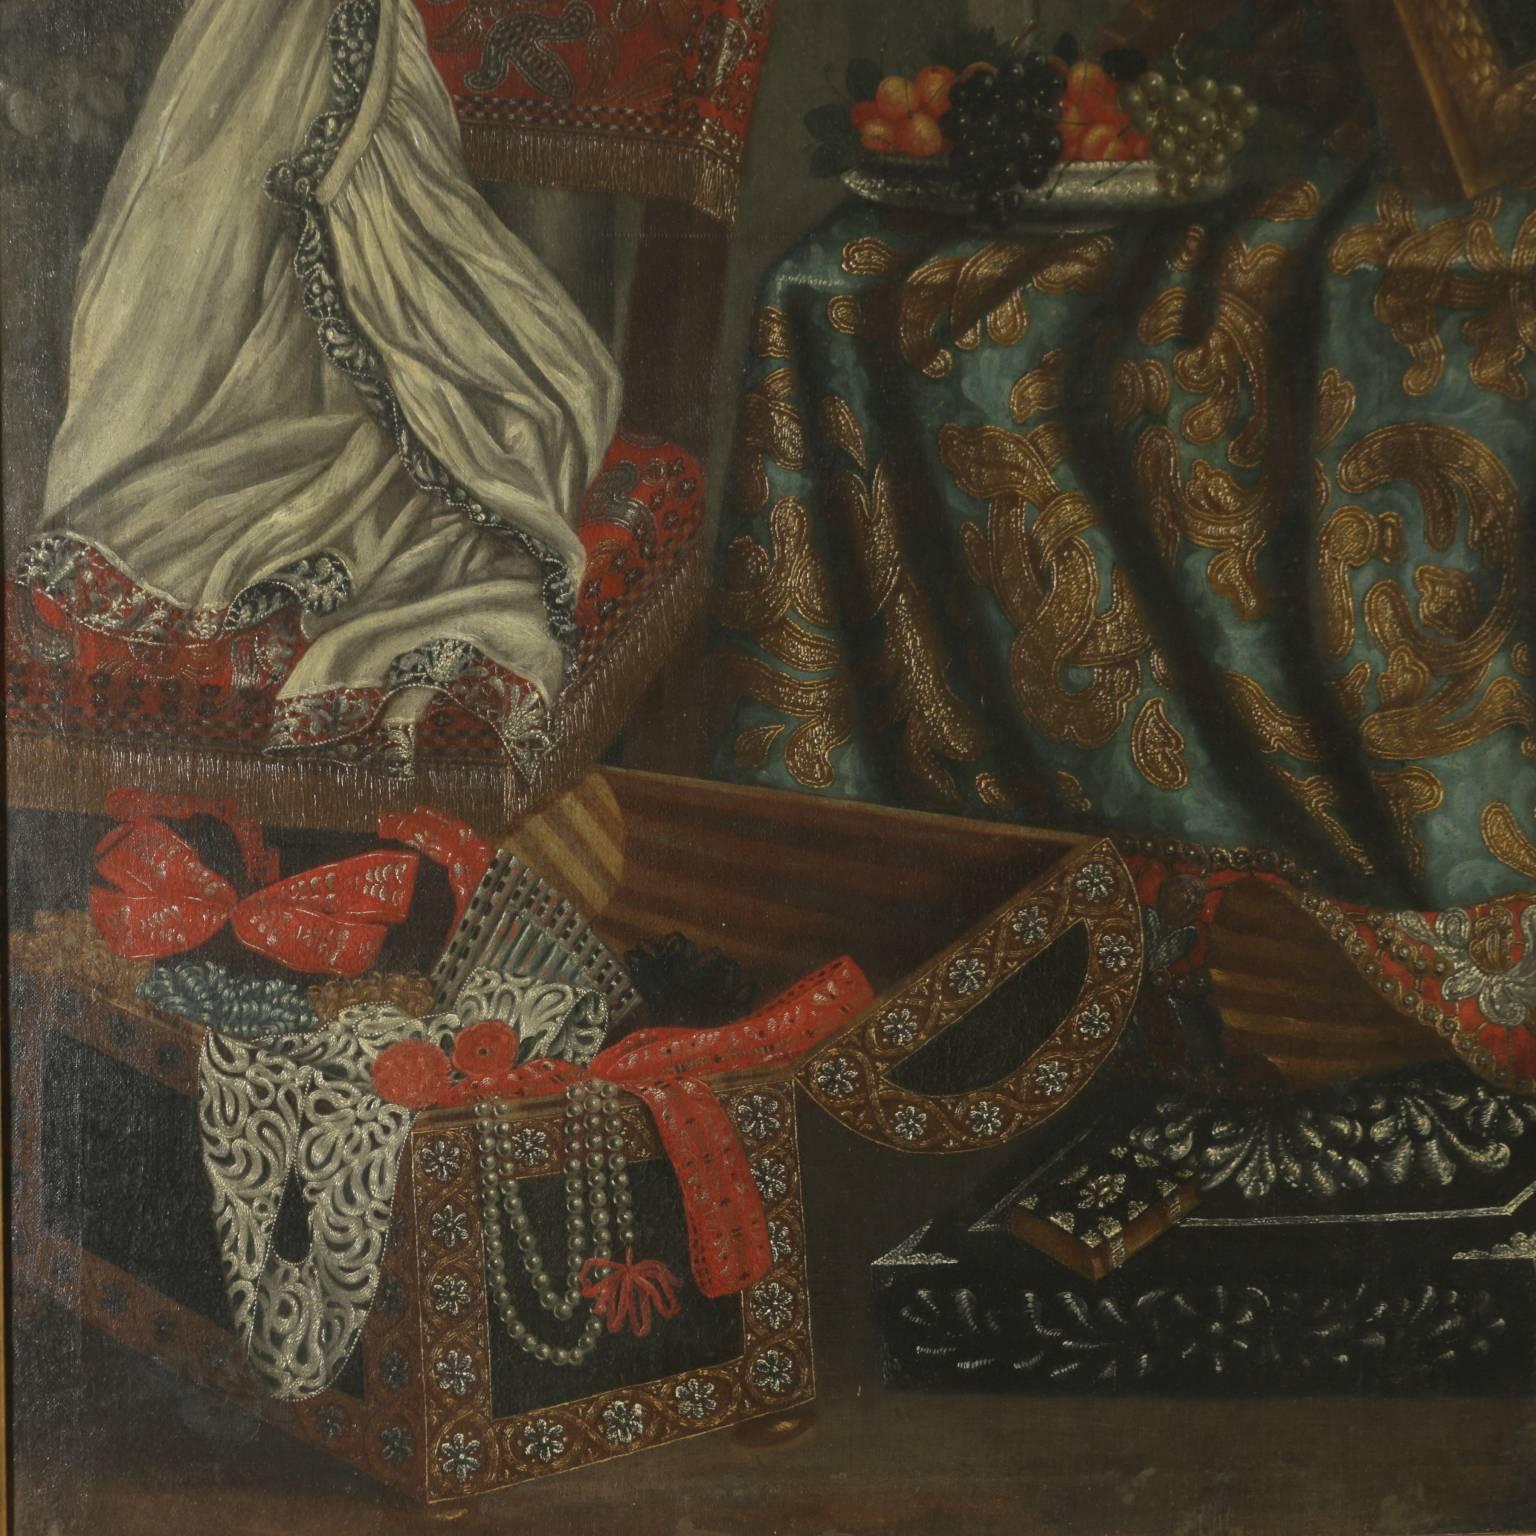 Still Life with carpets, jewels, fruit and a mirror - Black Still-Life Painting by Unknown